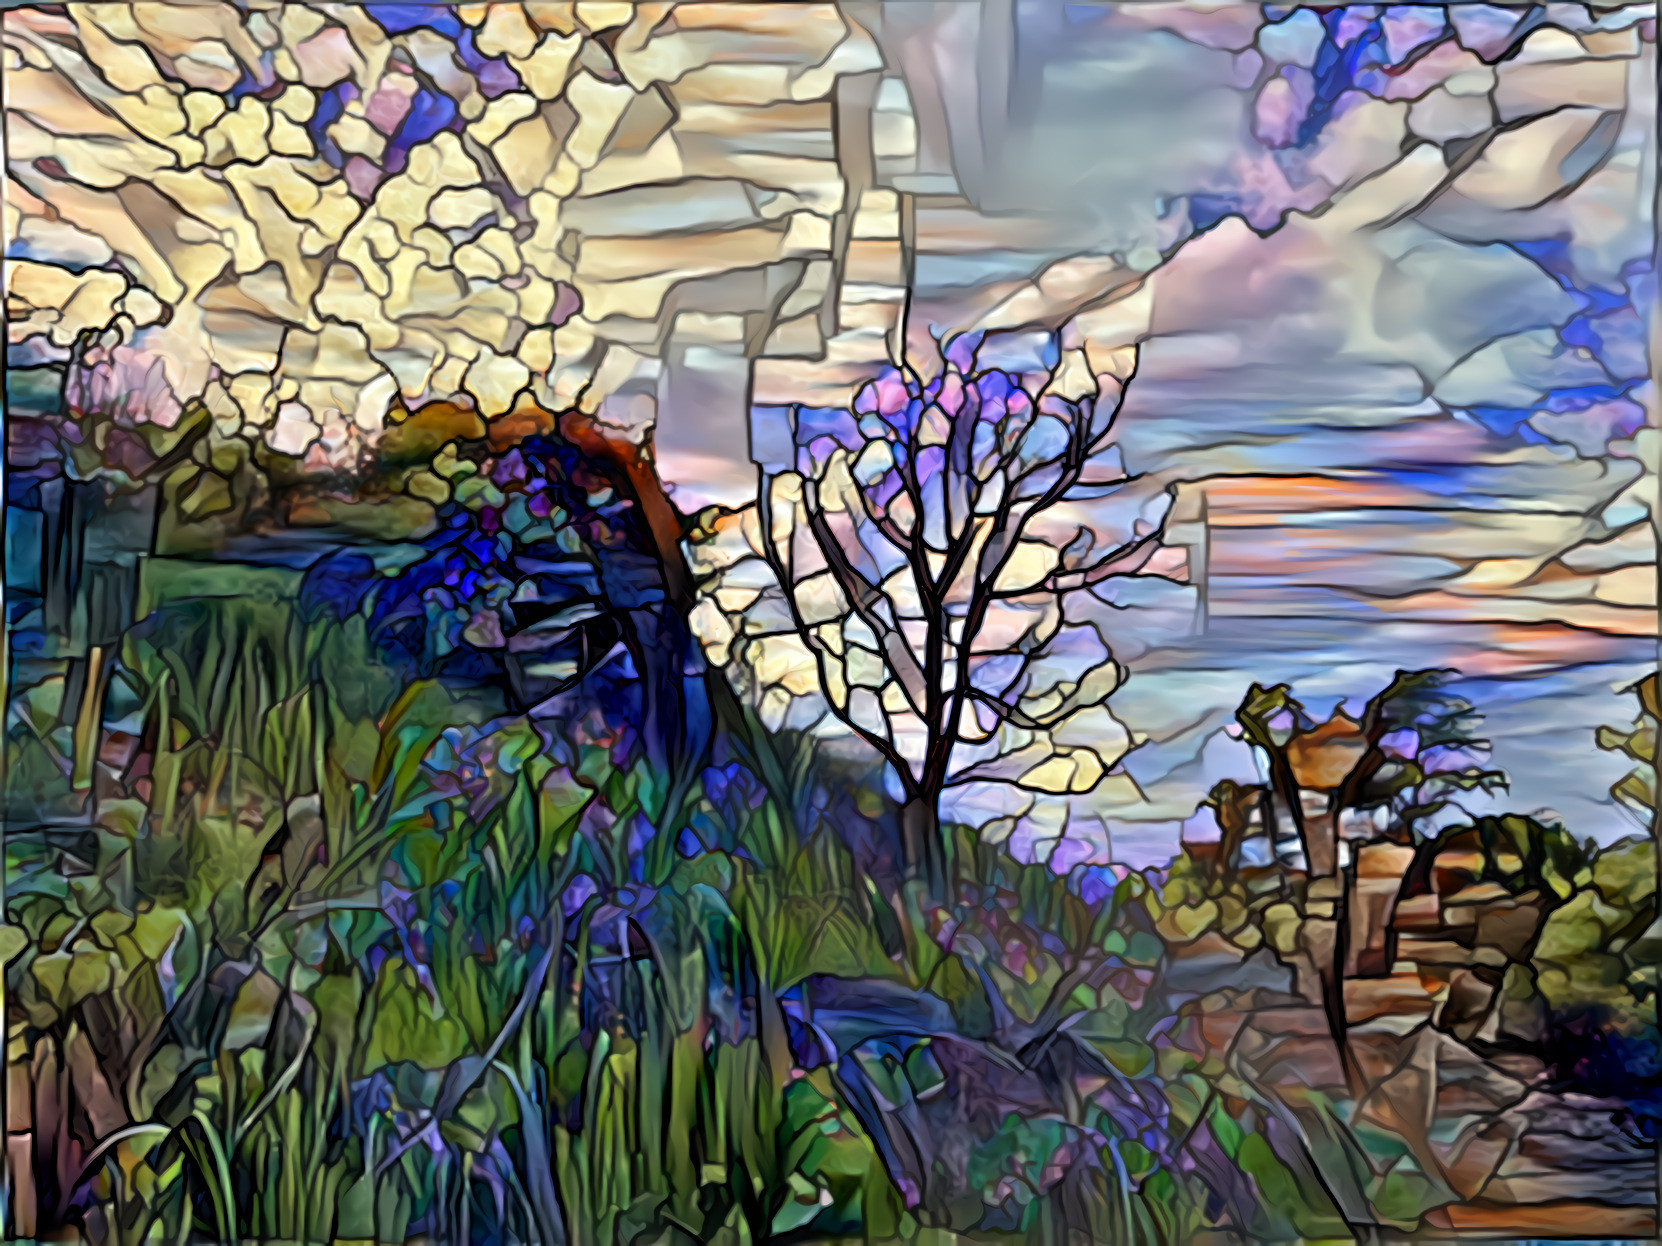 Stained glass hillside